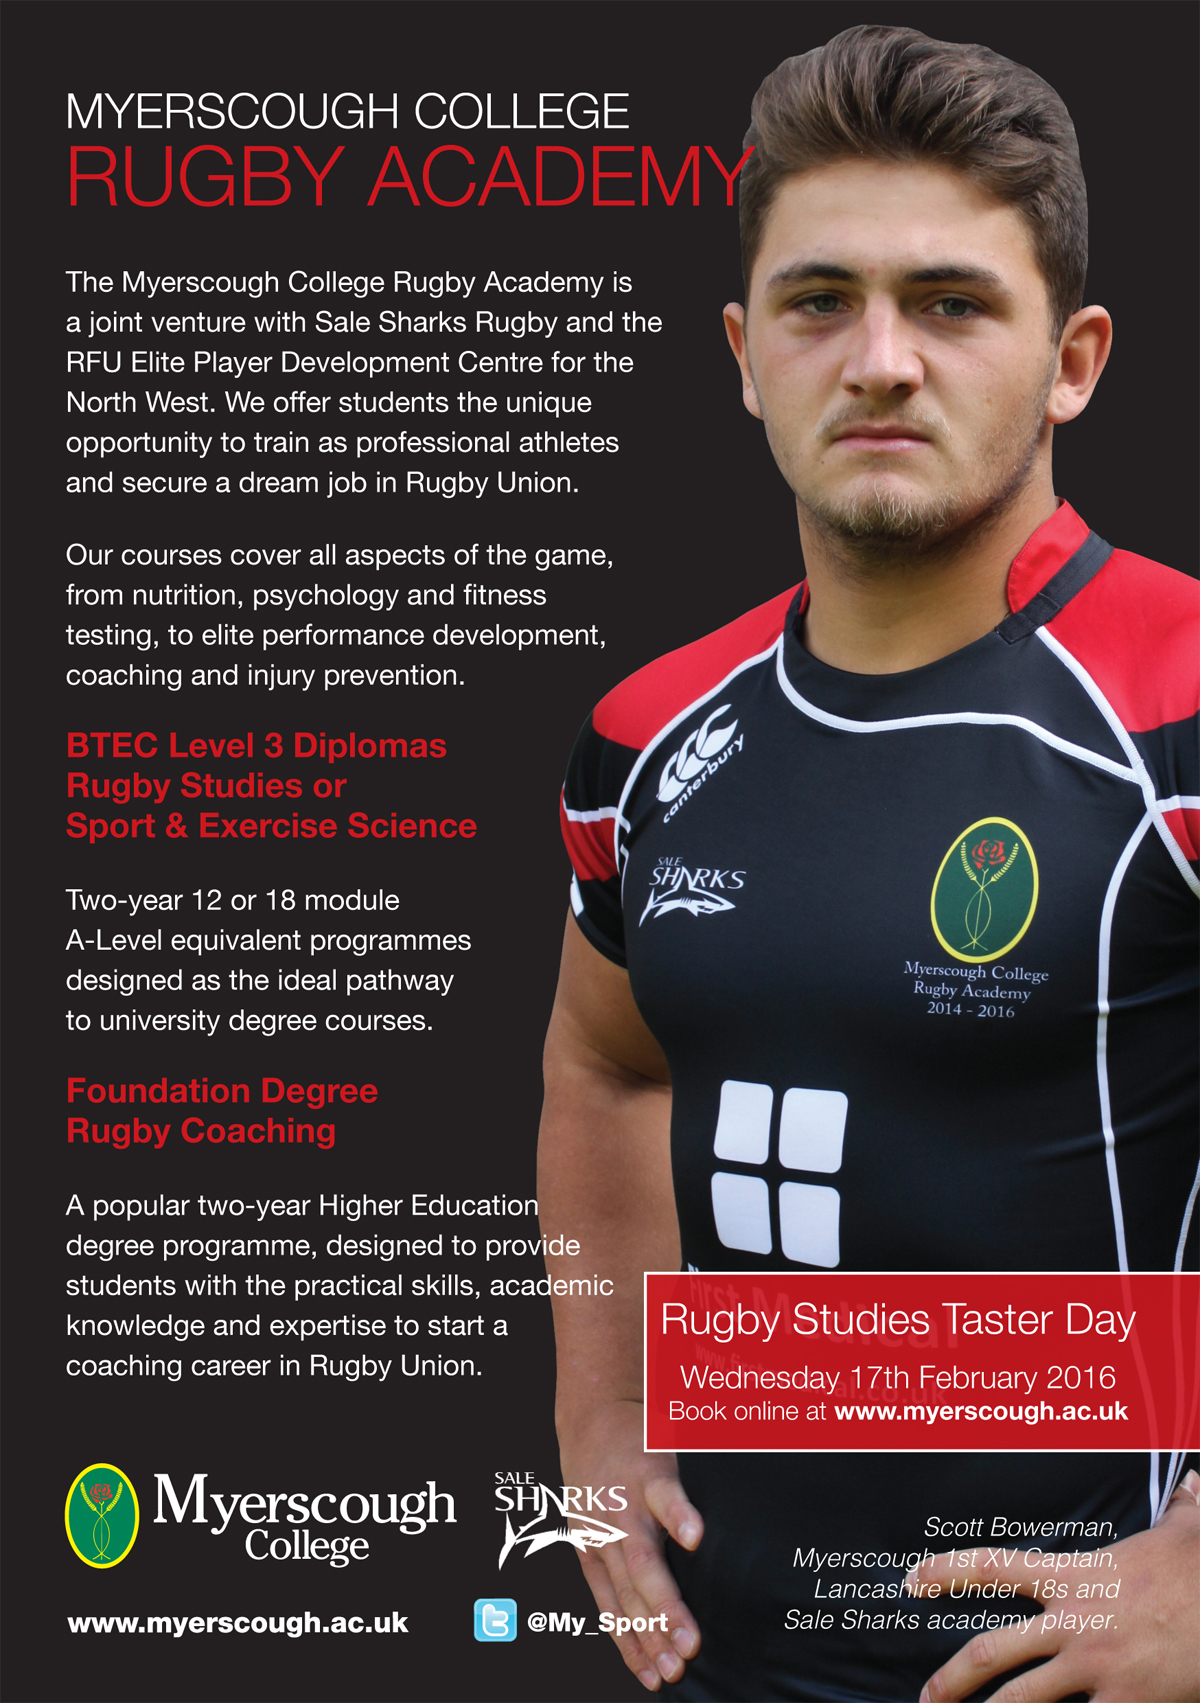 Myerscough College Rugby Academy